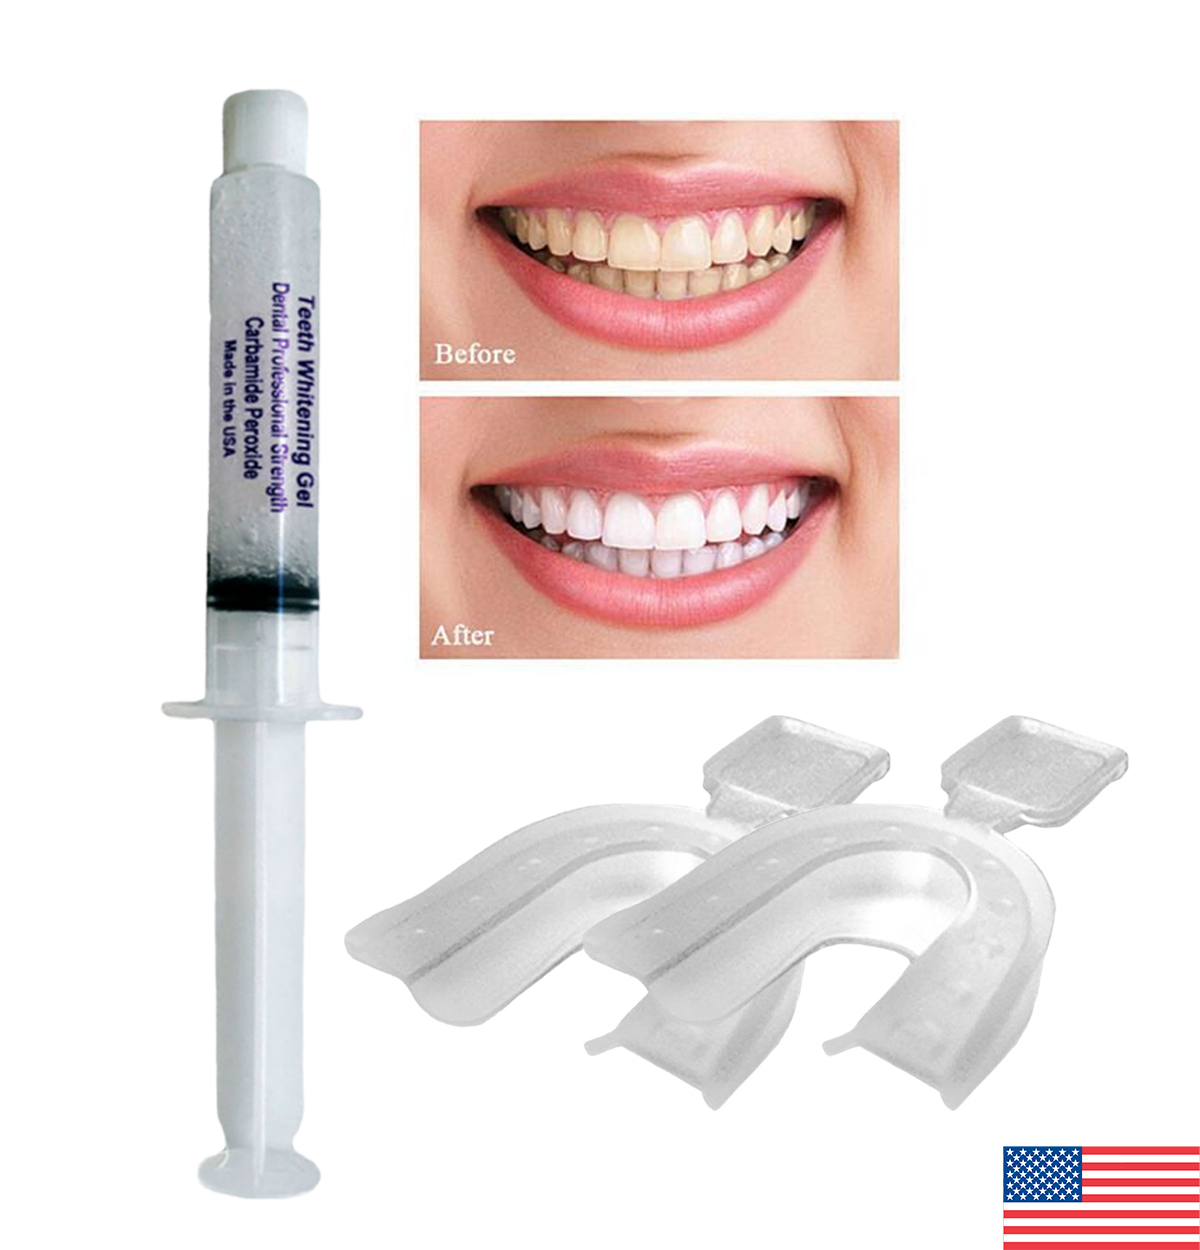 Teeth Whitening Gel Syringe 35% Tooth Bleaching + FREE 2 Thermoforming Trays ! ! - $8.95